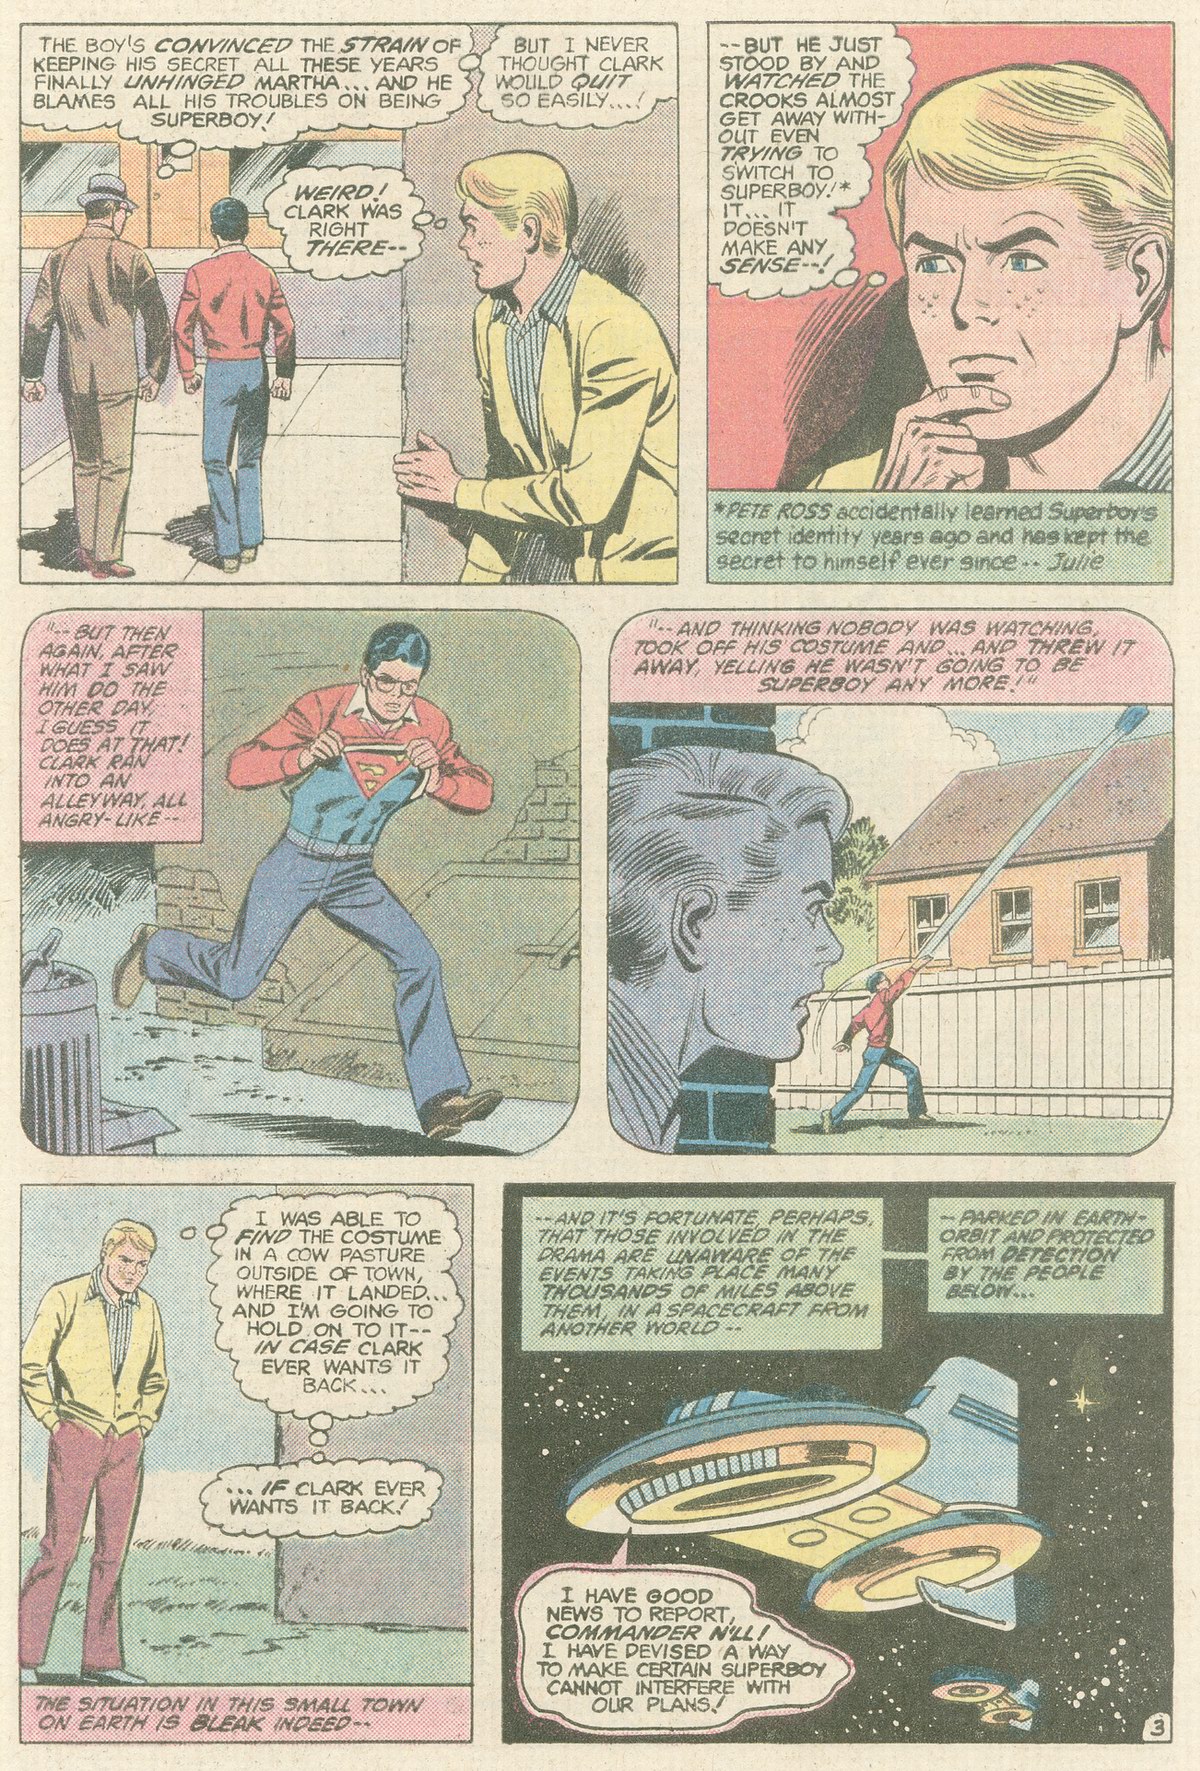 The New Adventures of Superboy 41 Page 3